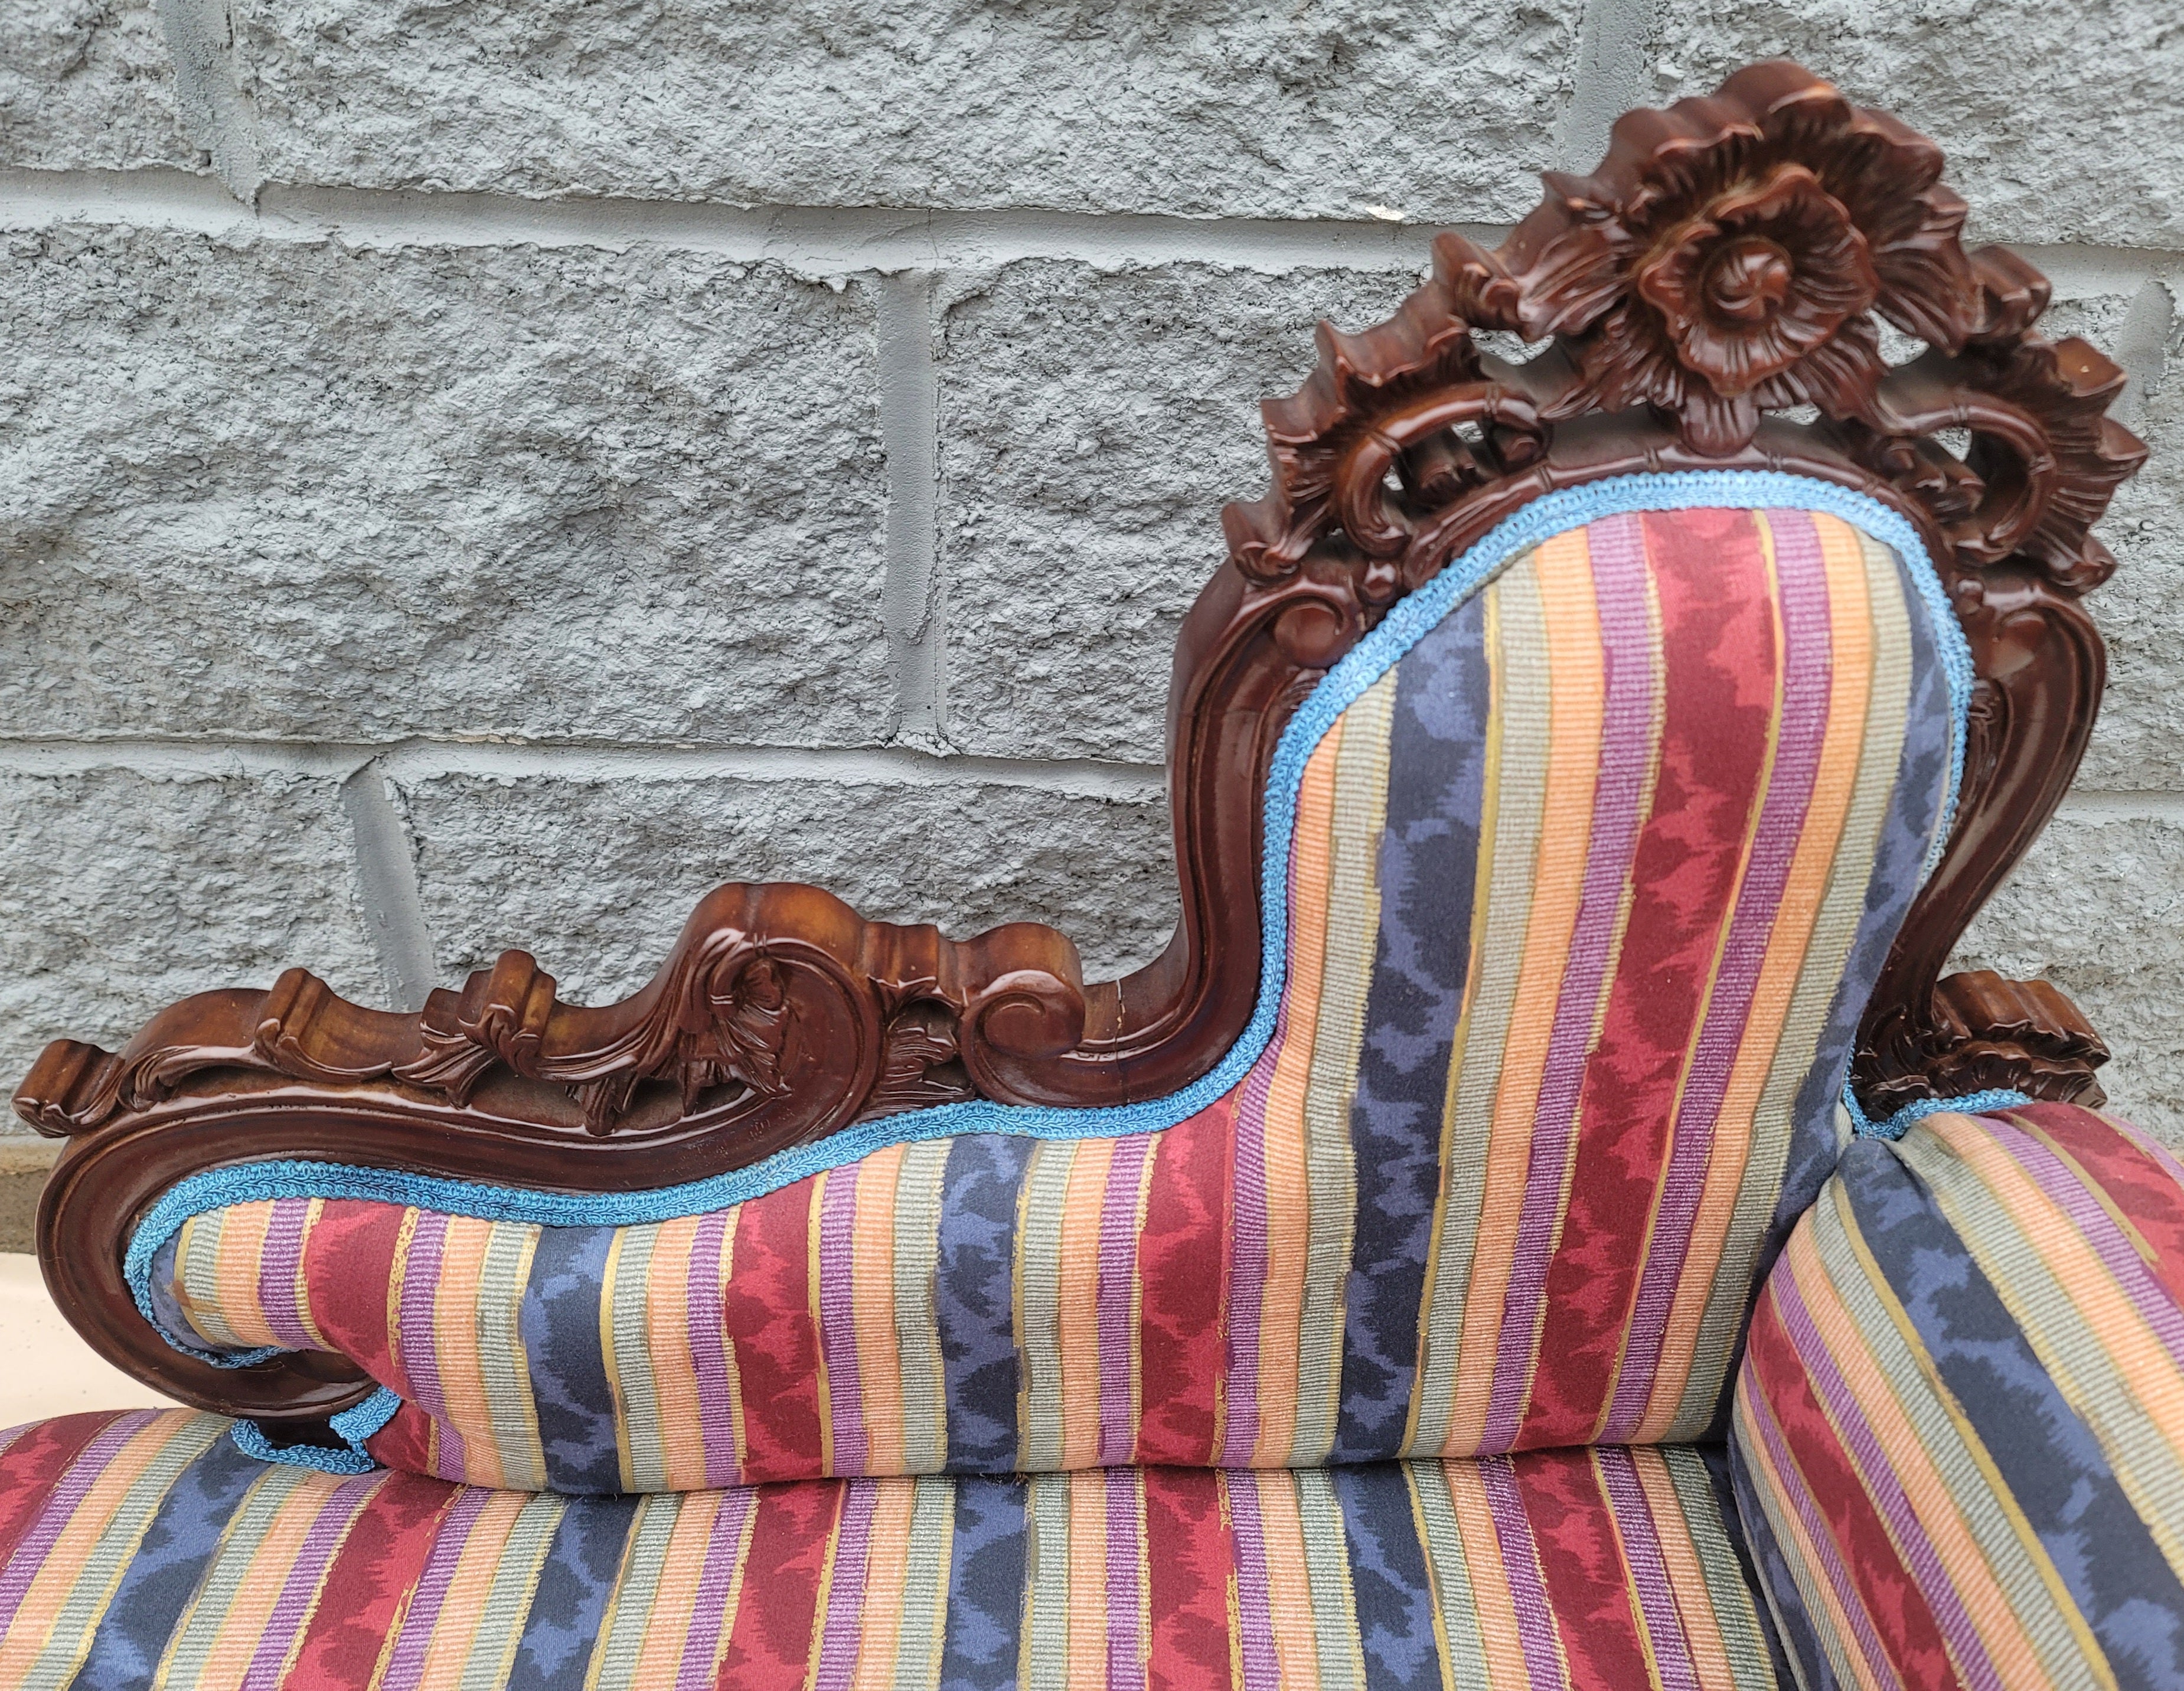 Rococo Style Carved Cherry Upholstered Child Size Chaise Lounge In Excellent Condition For Sale In Germantown, MD